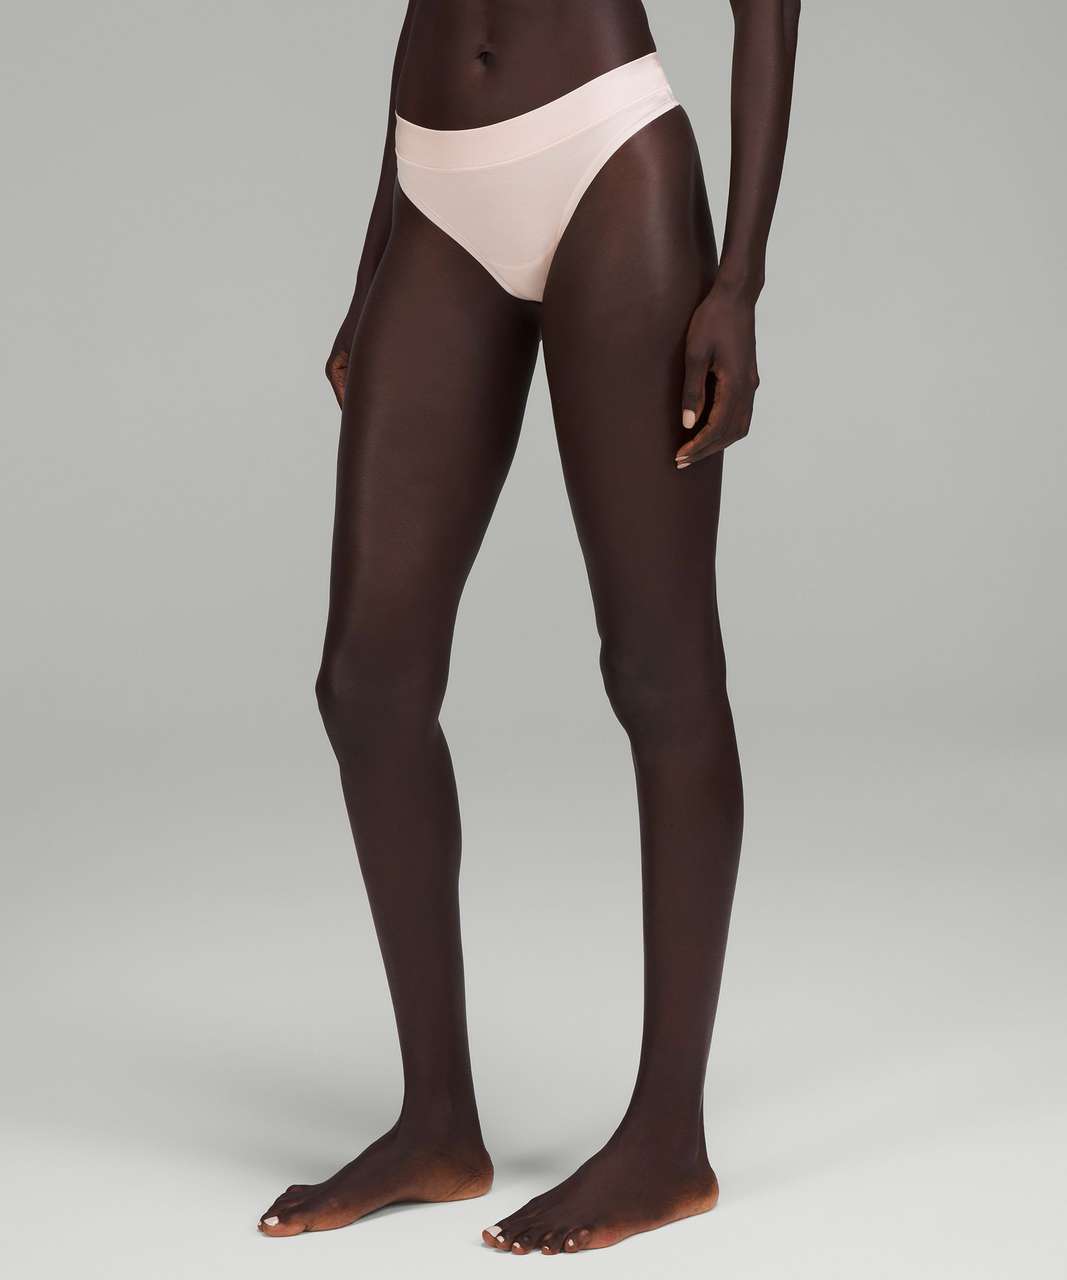 Lululemon Underwear Outlet South Africa - Dusty Bronze Womens UnderEase  Mid-Rise Thong Underwear